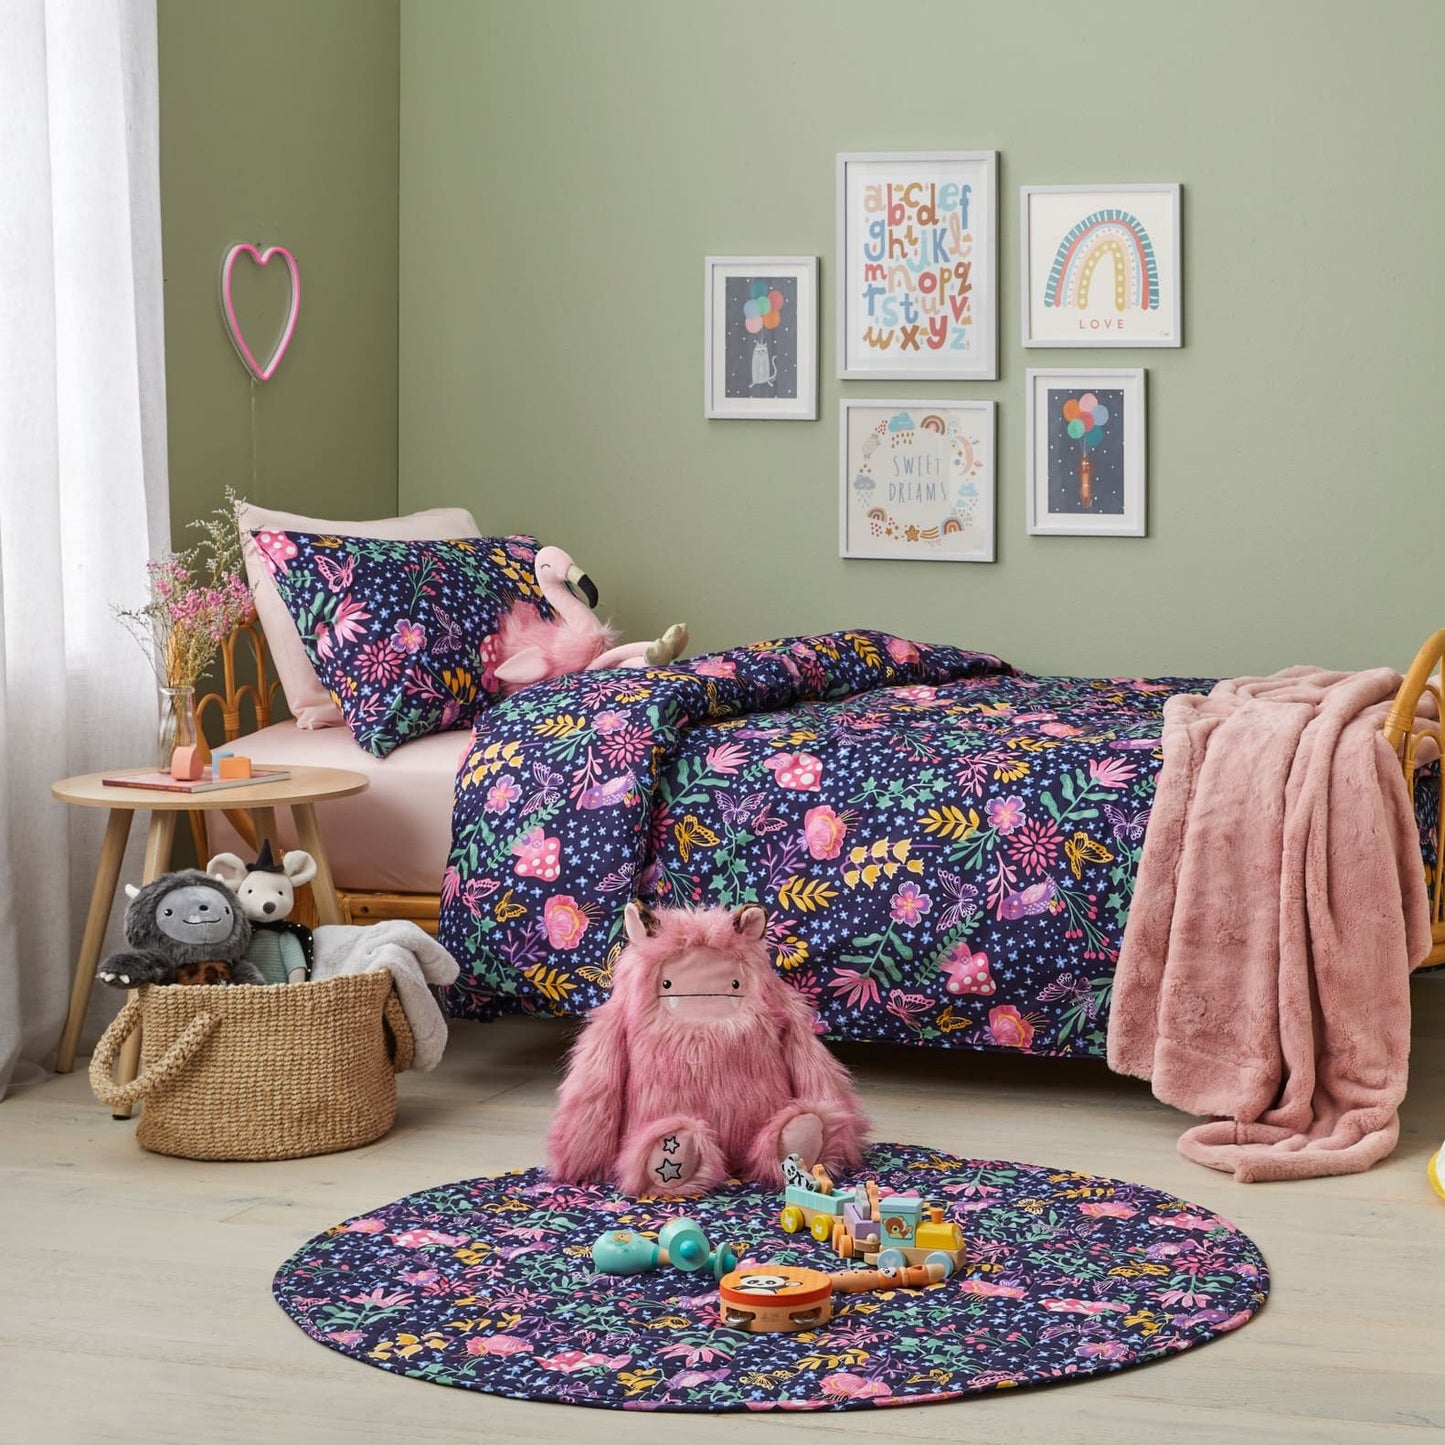 Ivy Garden Quilt Cover Set by Jiggle & Giggle